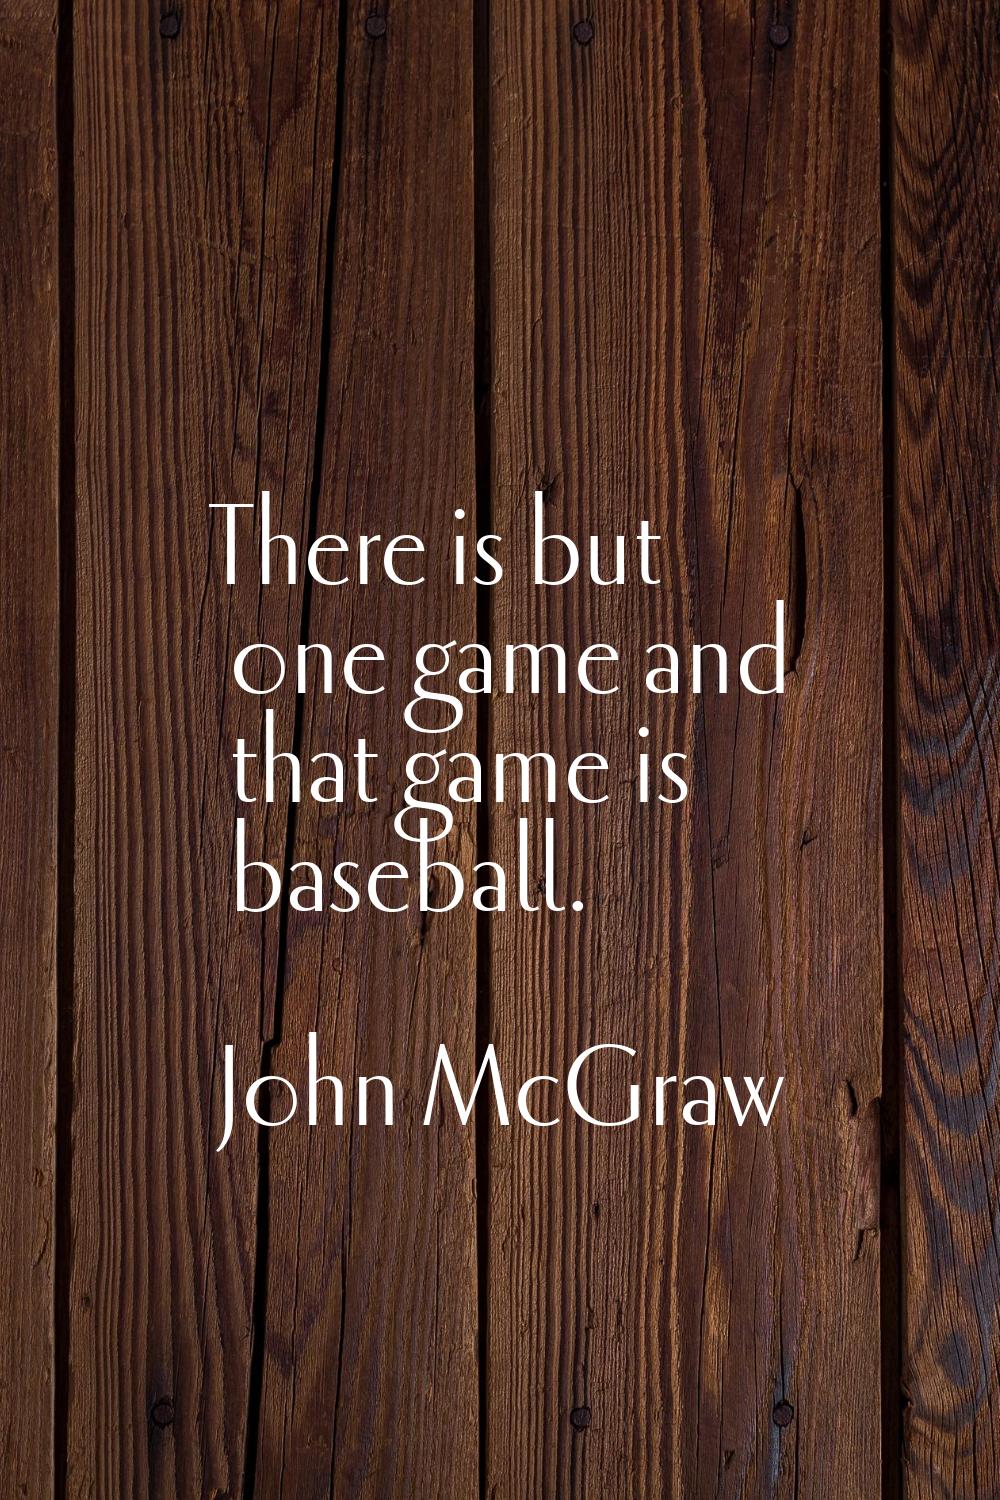 There is but one game and that game is baseball.